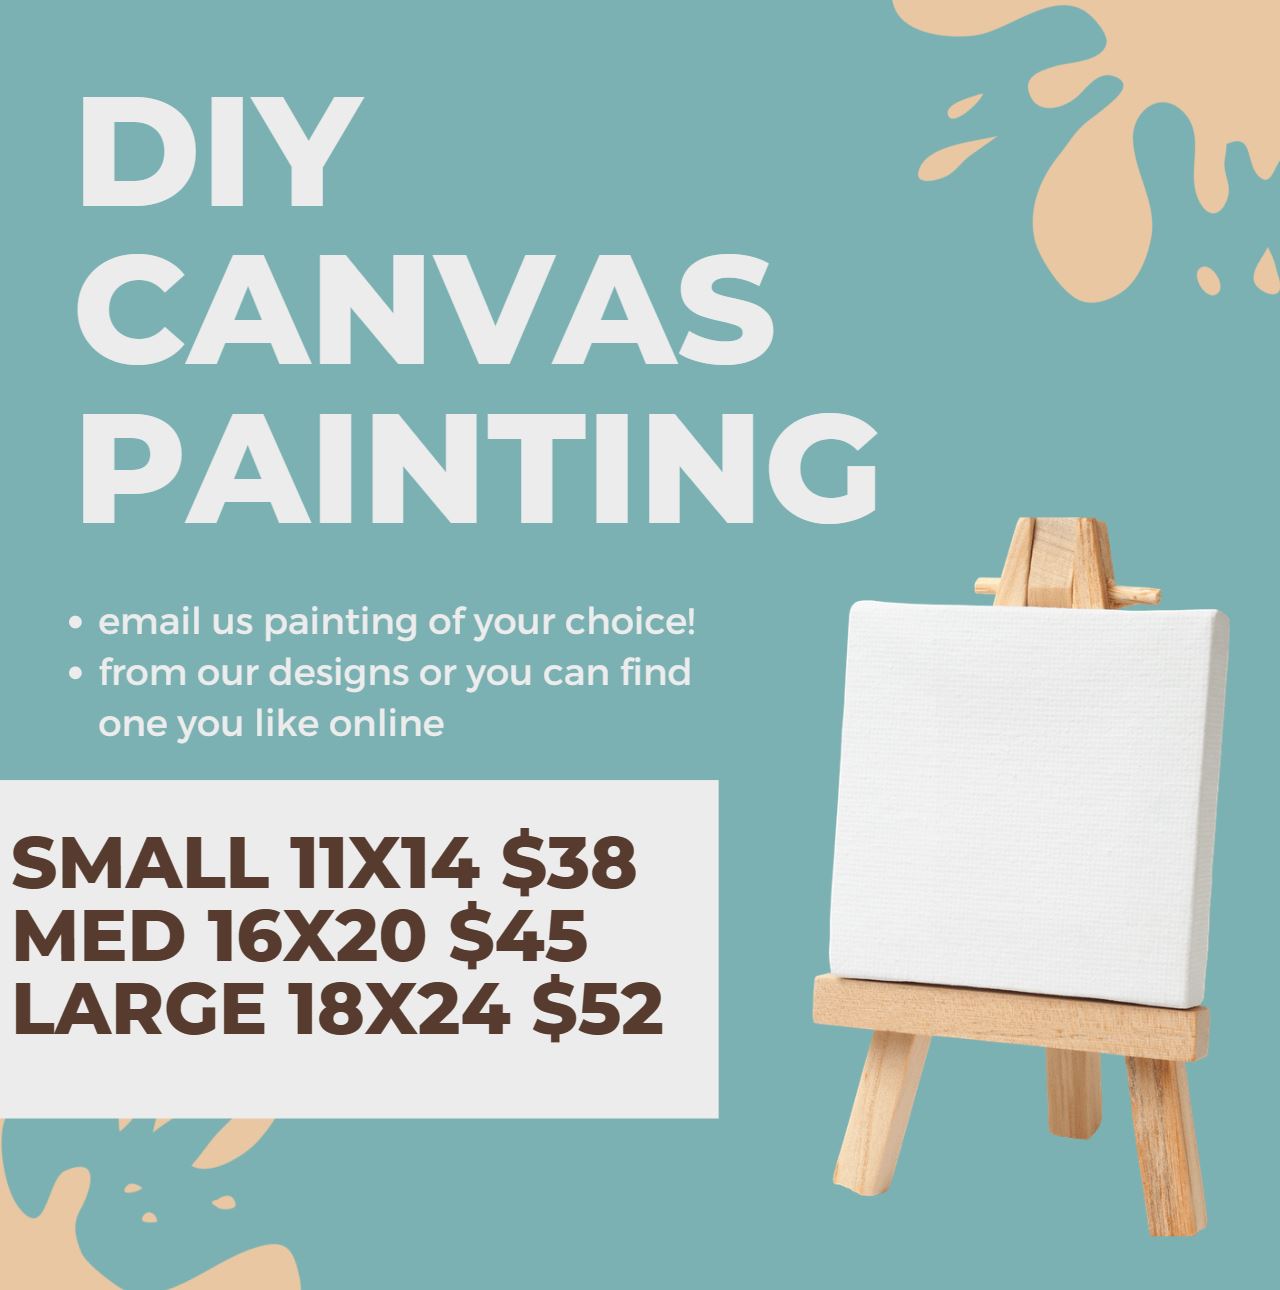 DIY CANVAS PAINTING Small 11x14| Canvas